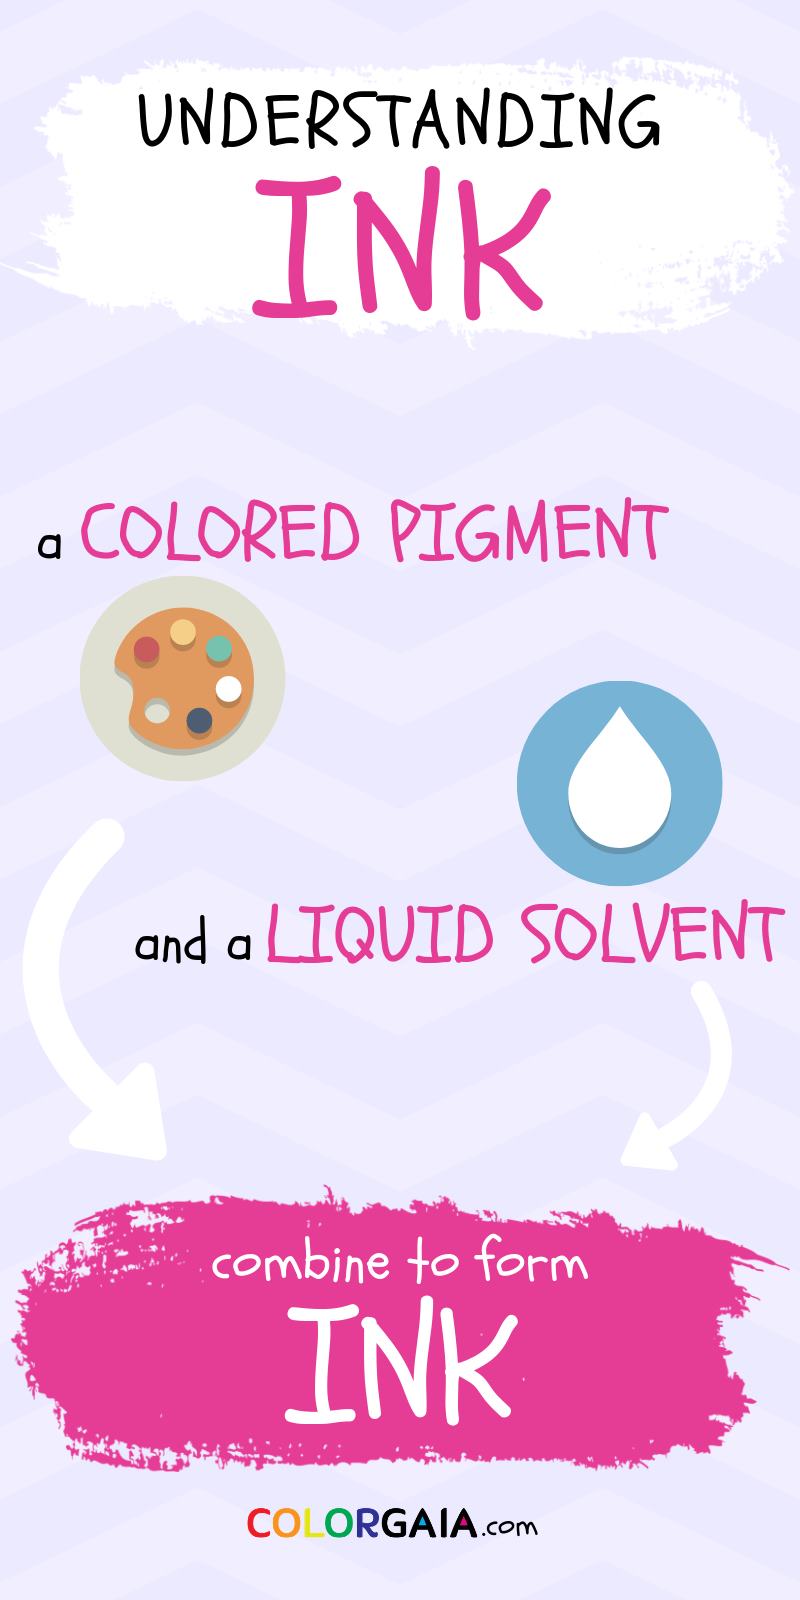 Ink is the combination of a pigment dye suspended in a liquid solution like alcohol or water.